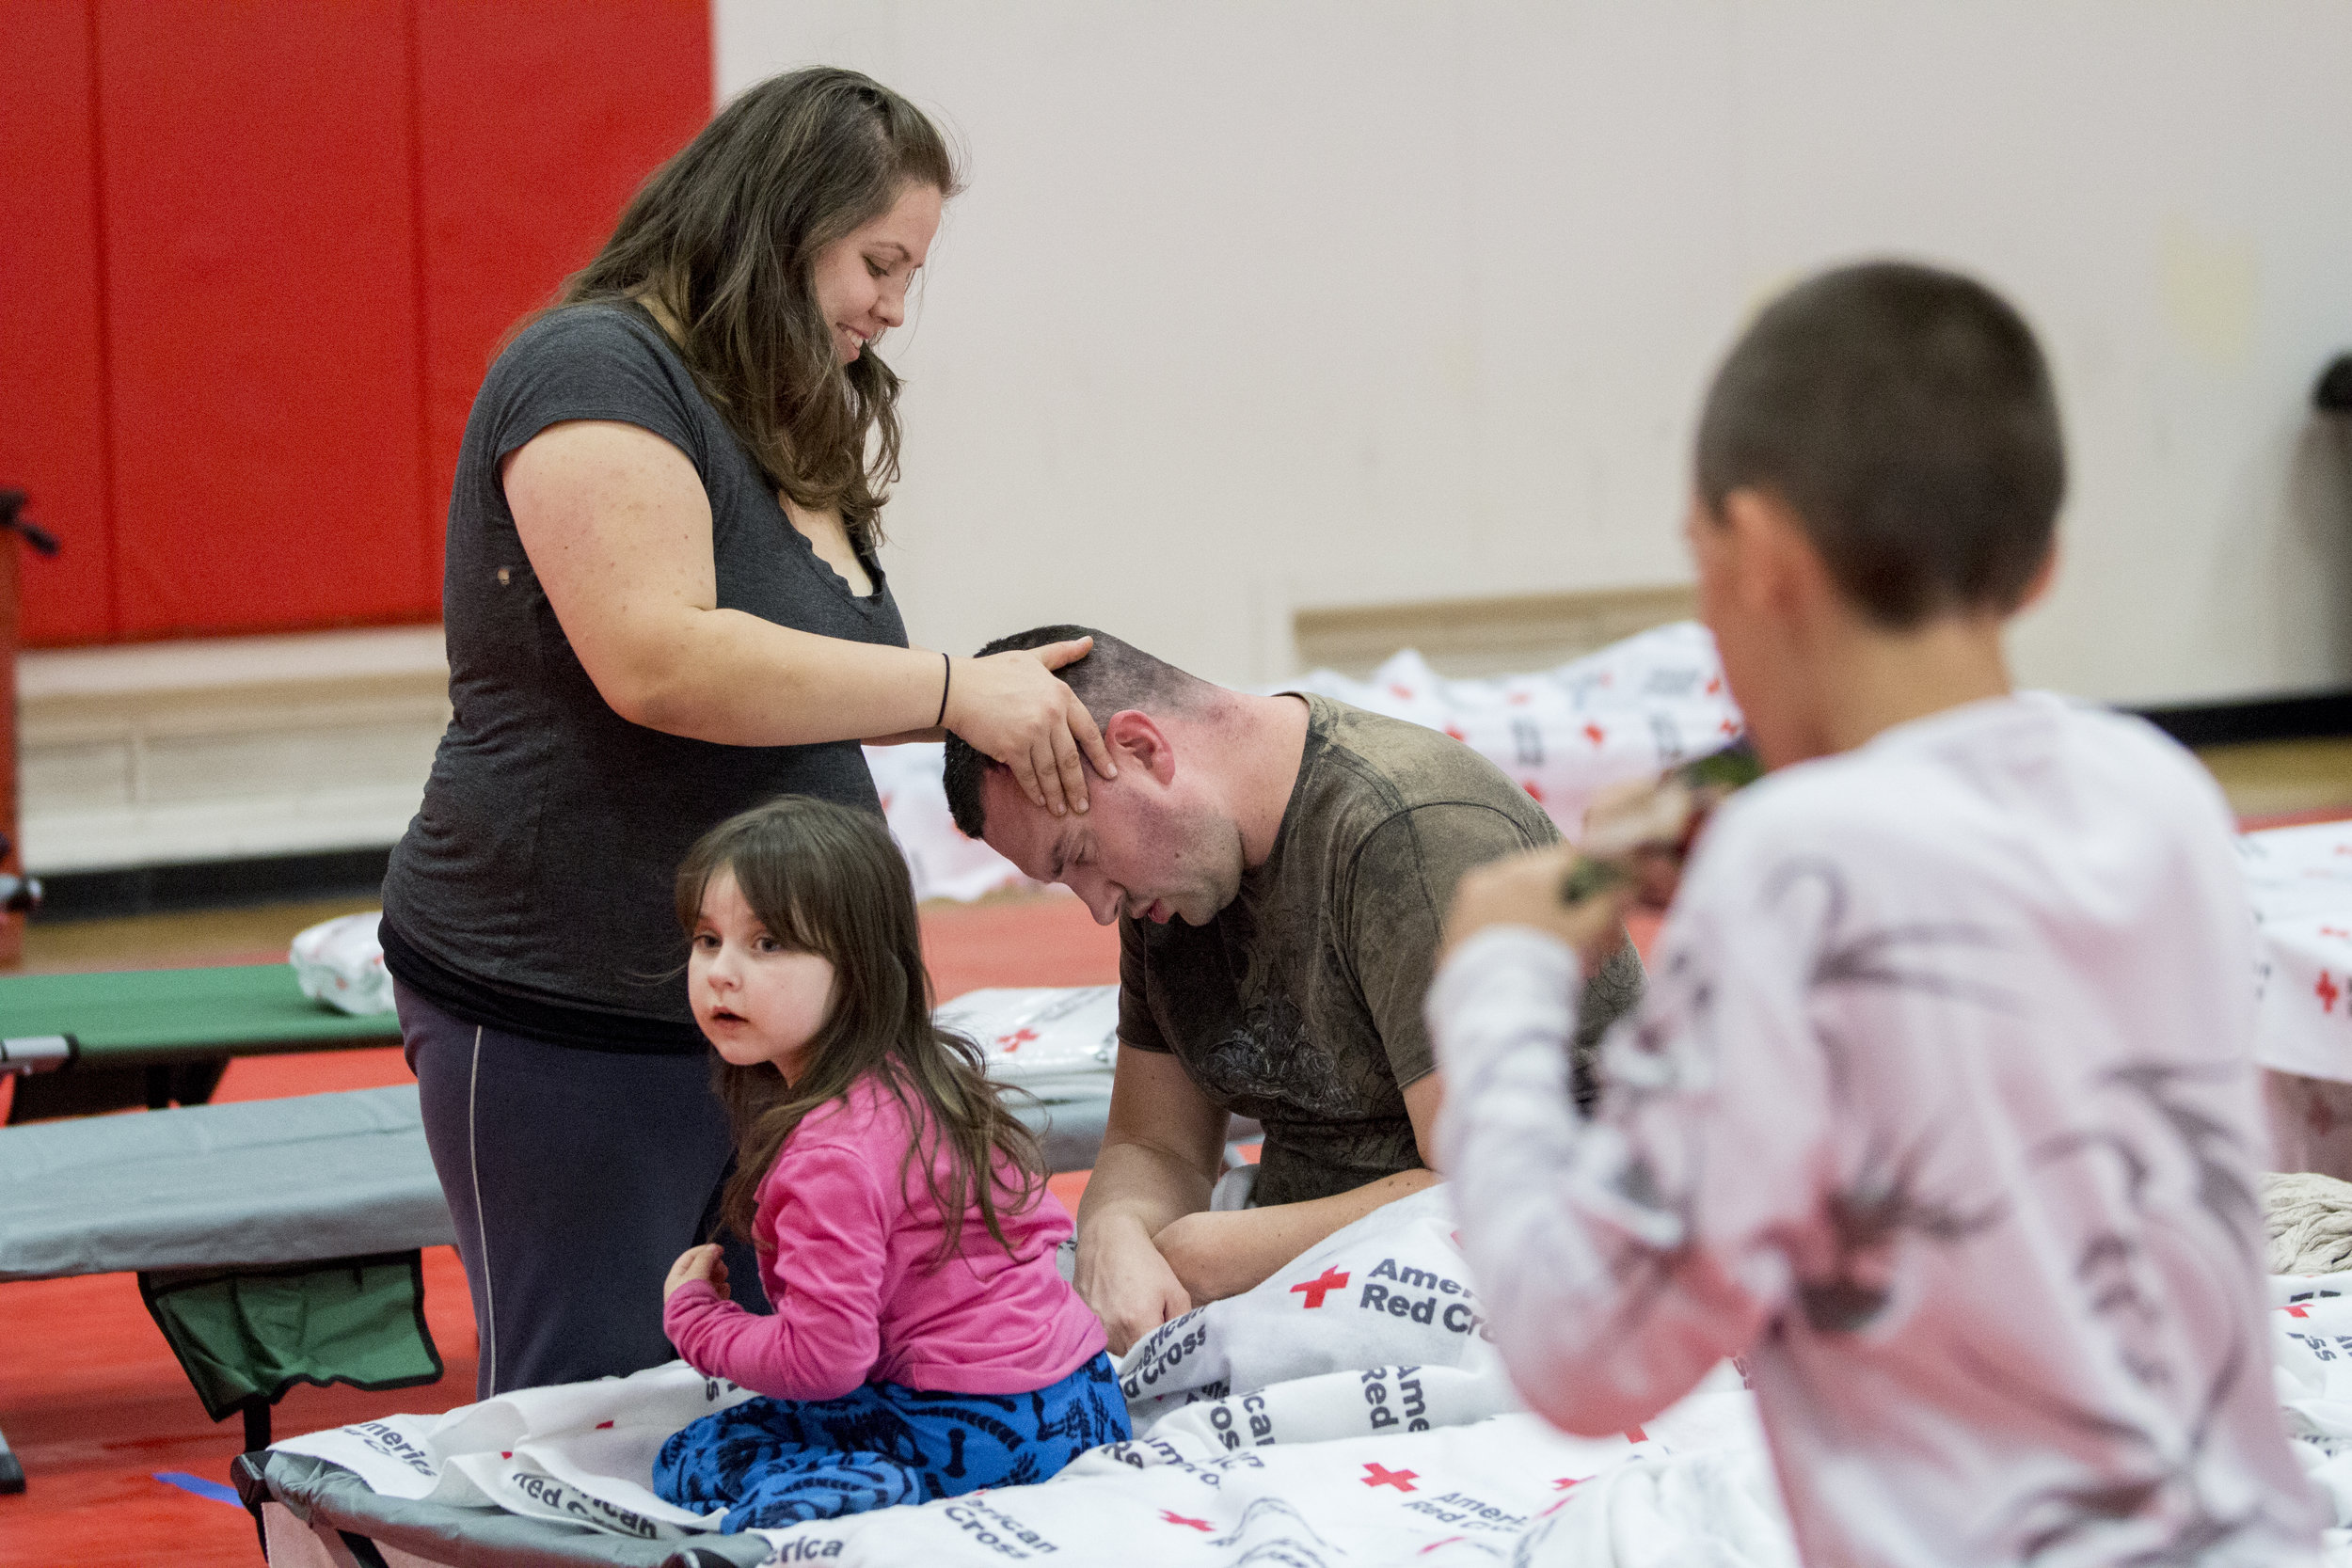  An evacuee cares for her husband and family at the Woolsey fire evacuation center set up at Los Angeles Pierce College on November 9, 2018 in Woodland Hills, Calif. (Jose Lopez) 